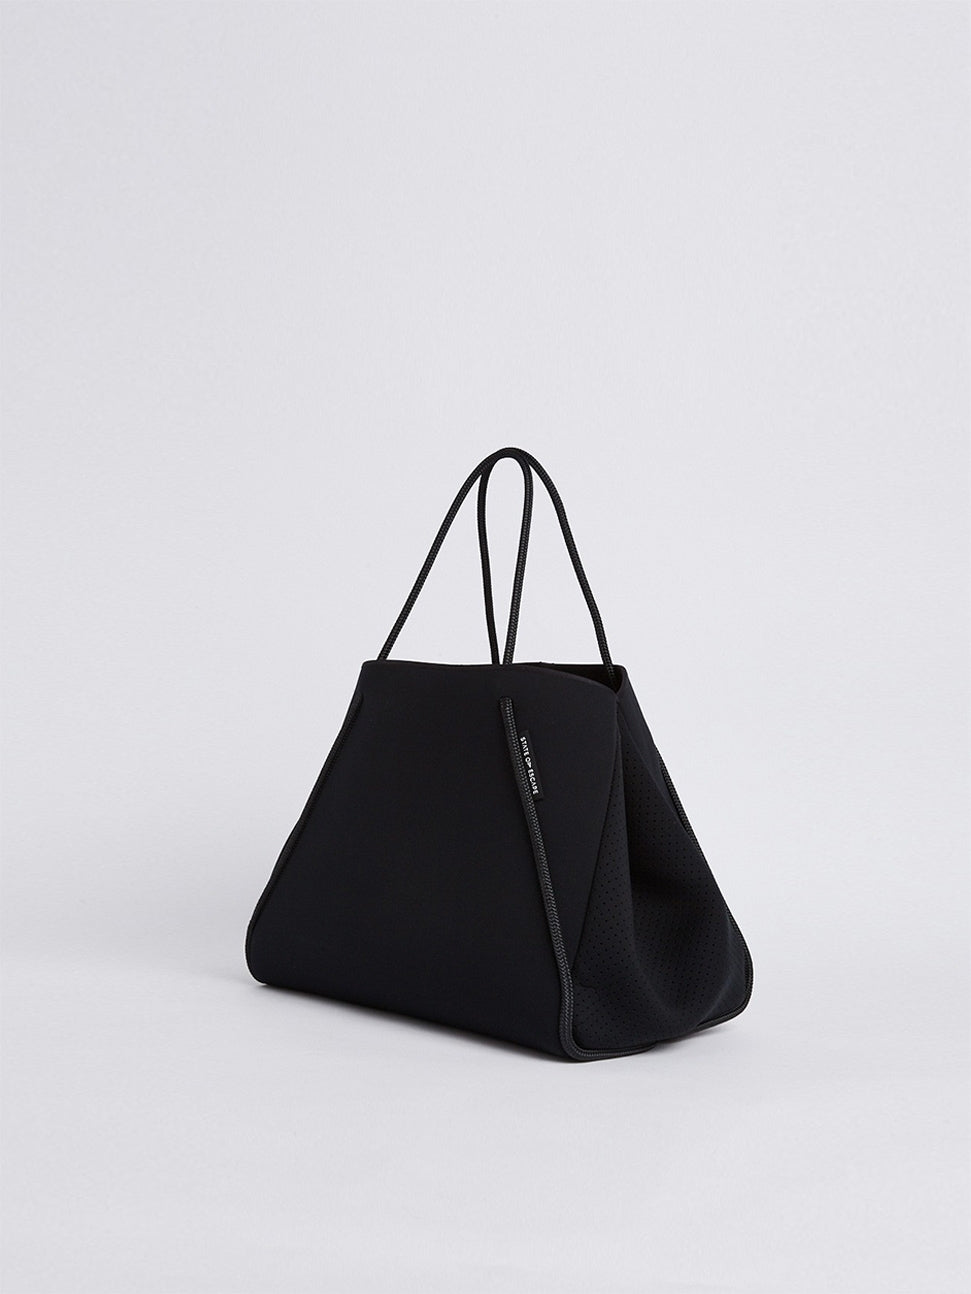 state of escape　GUISE TOTE  Black Out　中